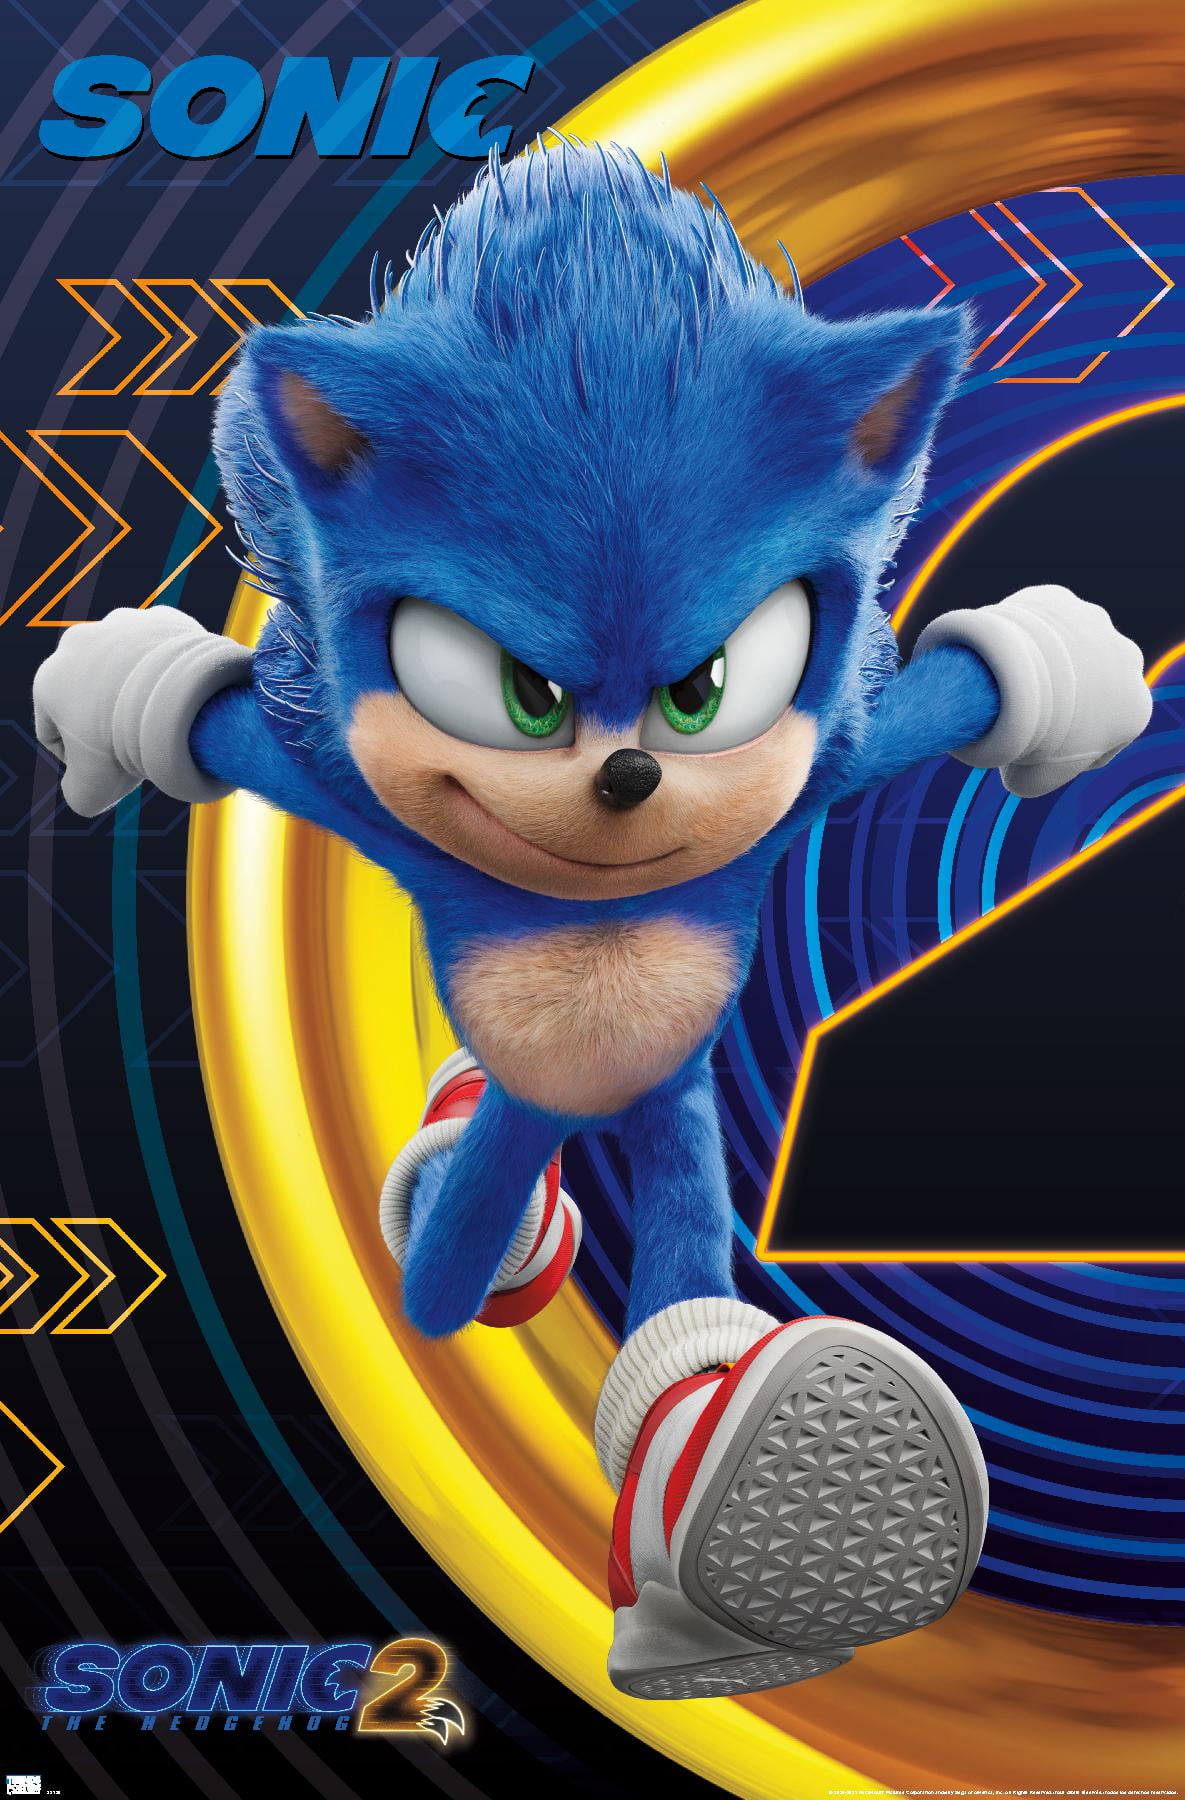 Sonic The Hedgehog 2 Sonic 2237 X 34 Poster By Trends